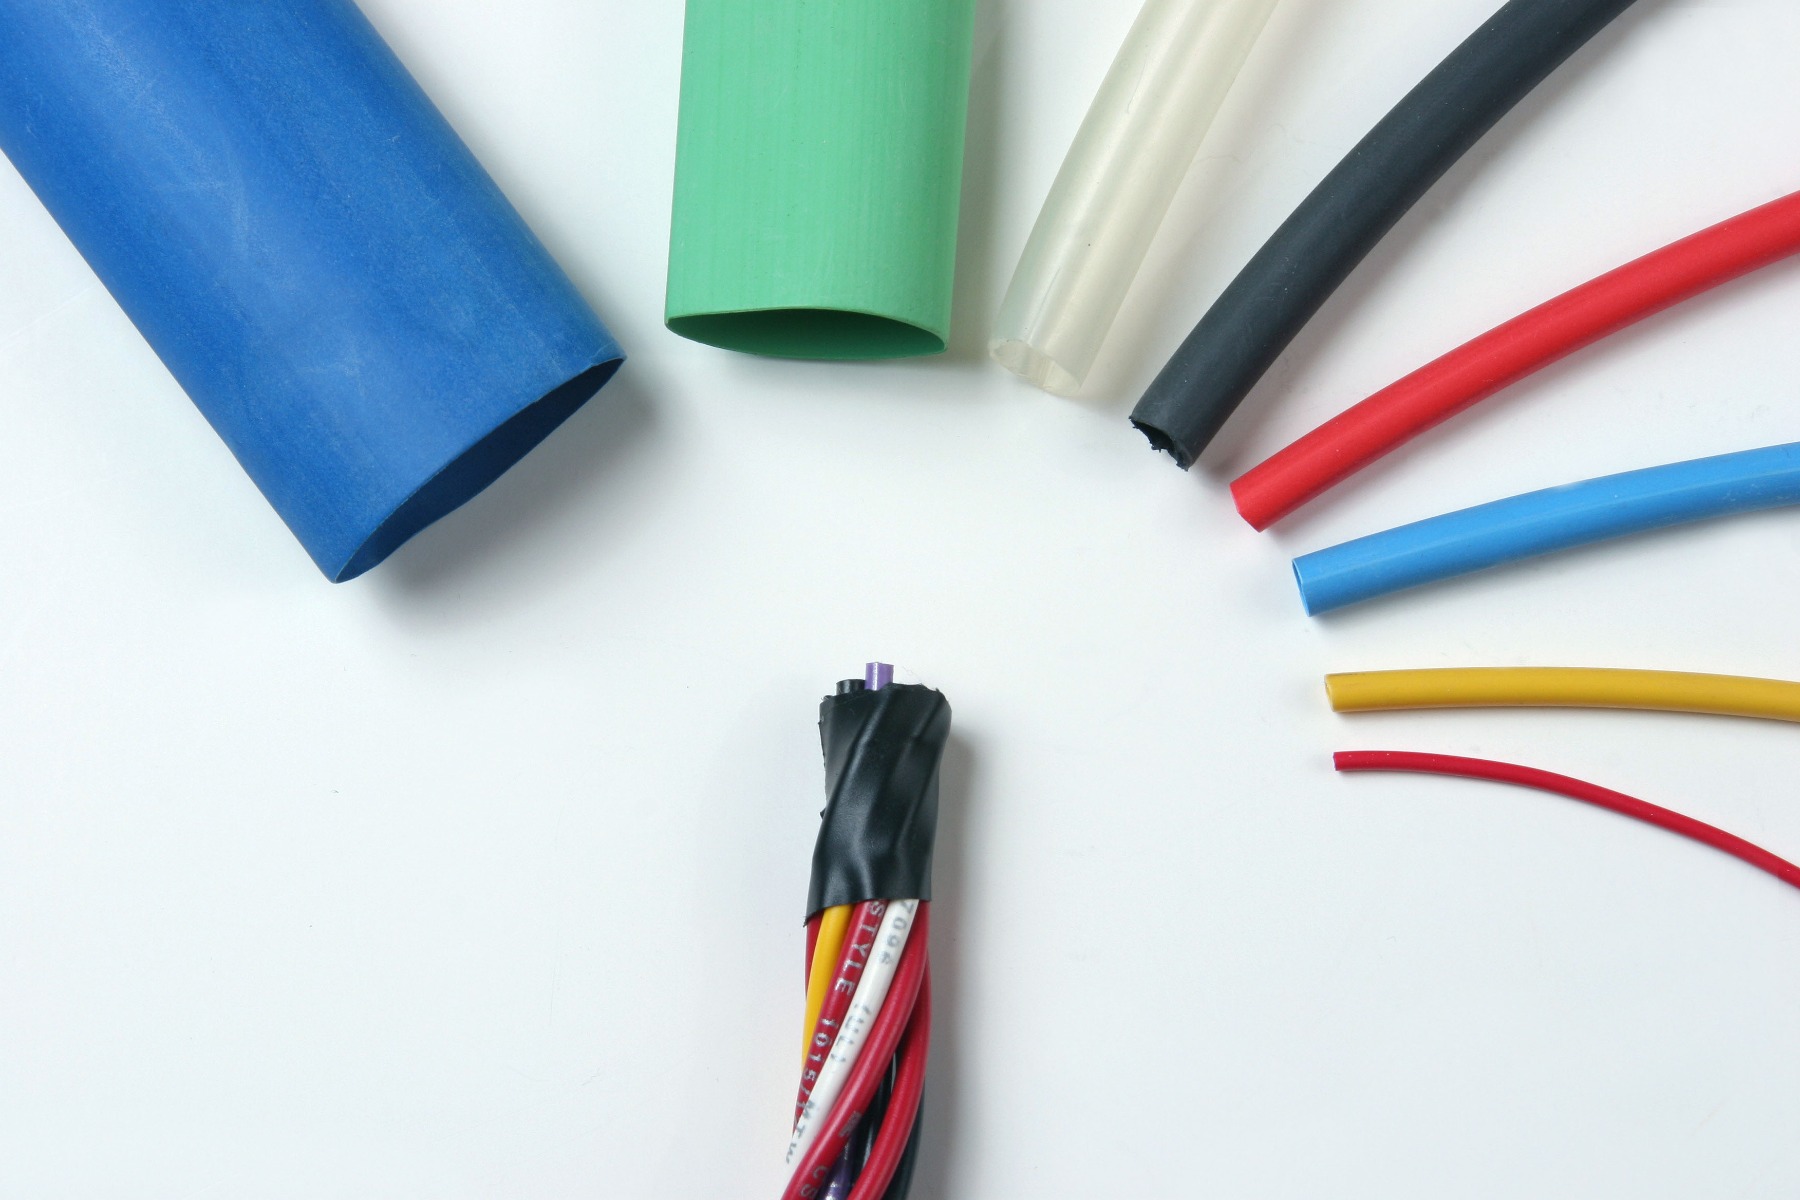 Shrink Ratio 3:1 Heat Shrink Tube Heat Shrink Tubing Kit Wire Shrink Wrap Tubing Protector Saver Cover for Phone Earphone Cable Marine Waterproof Electrical Shrink Tubing with Adhesive Lined 3Colors 